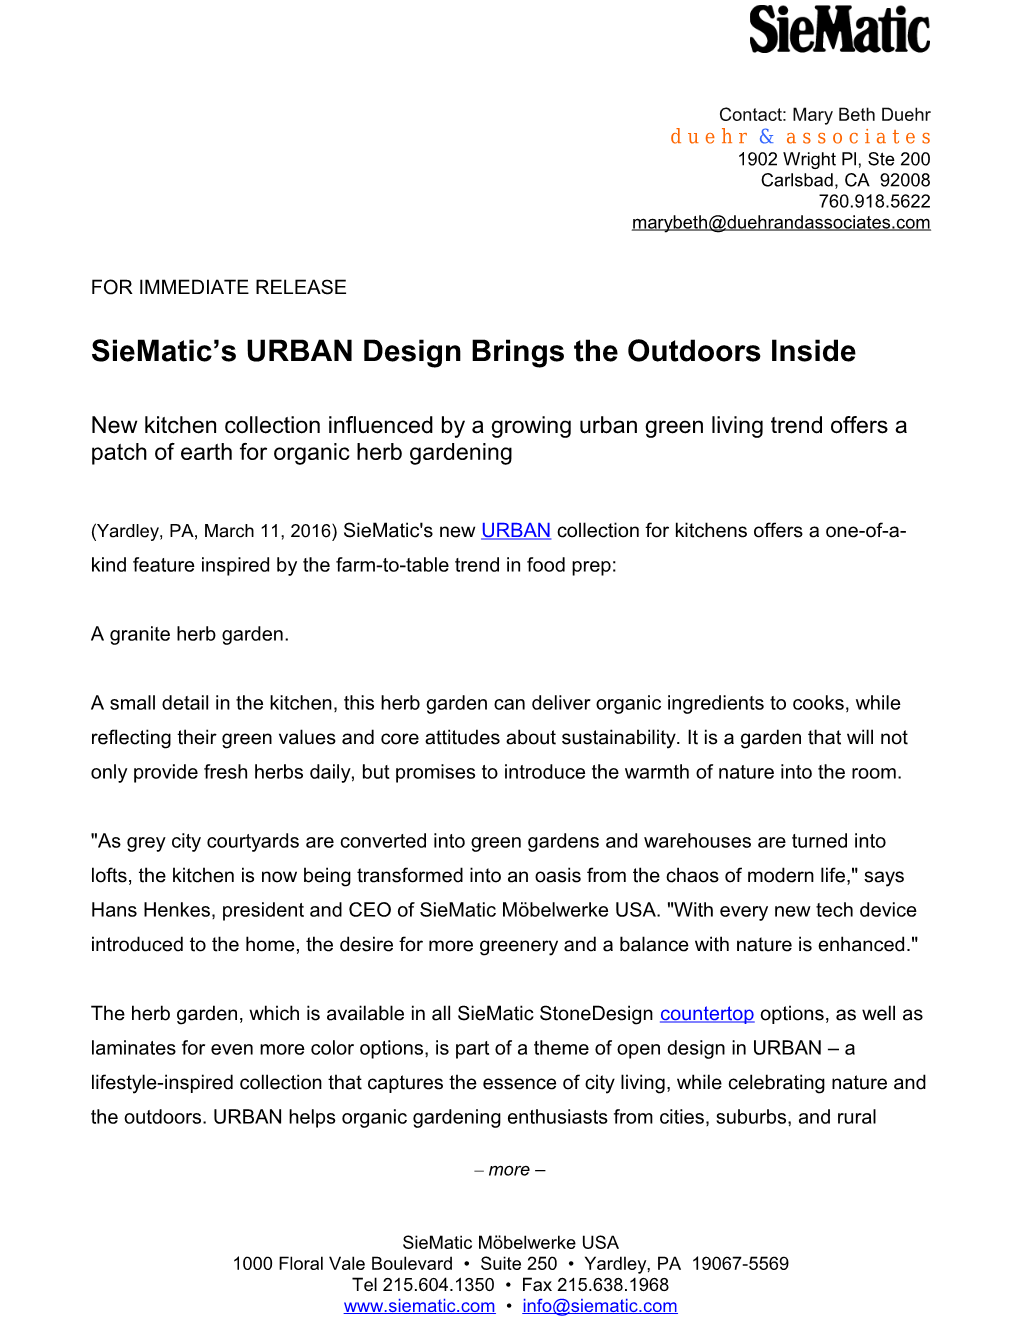 Siematic S URBAN Design Brings the Outdoors Inside